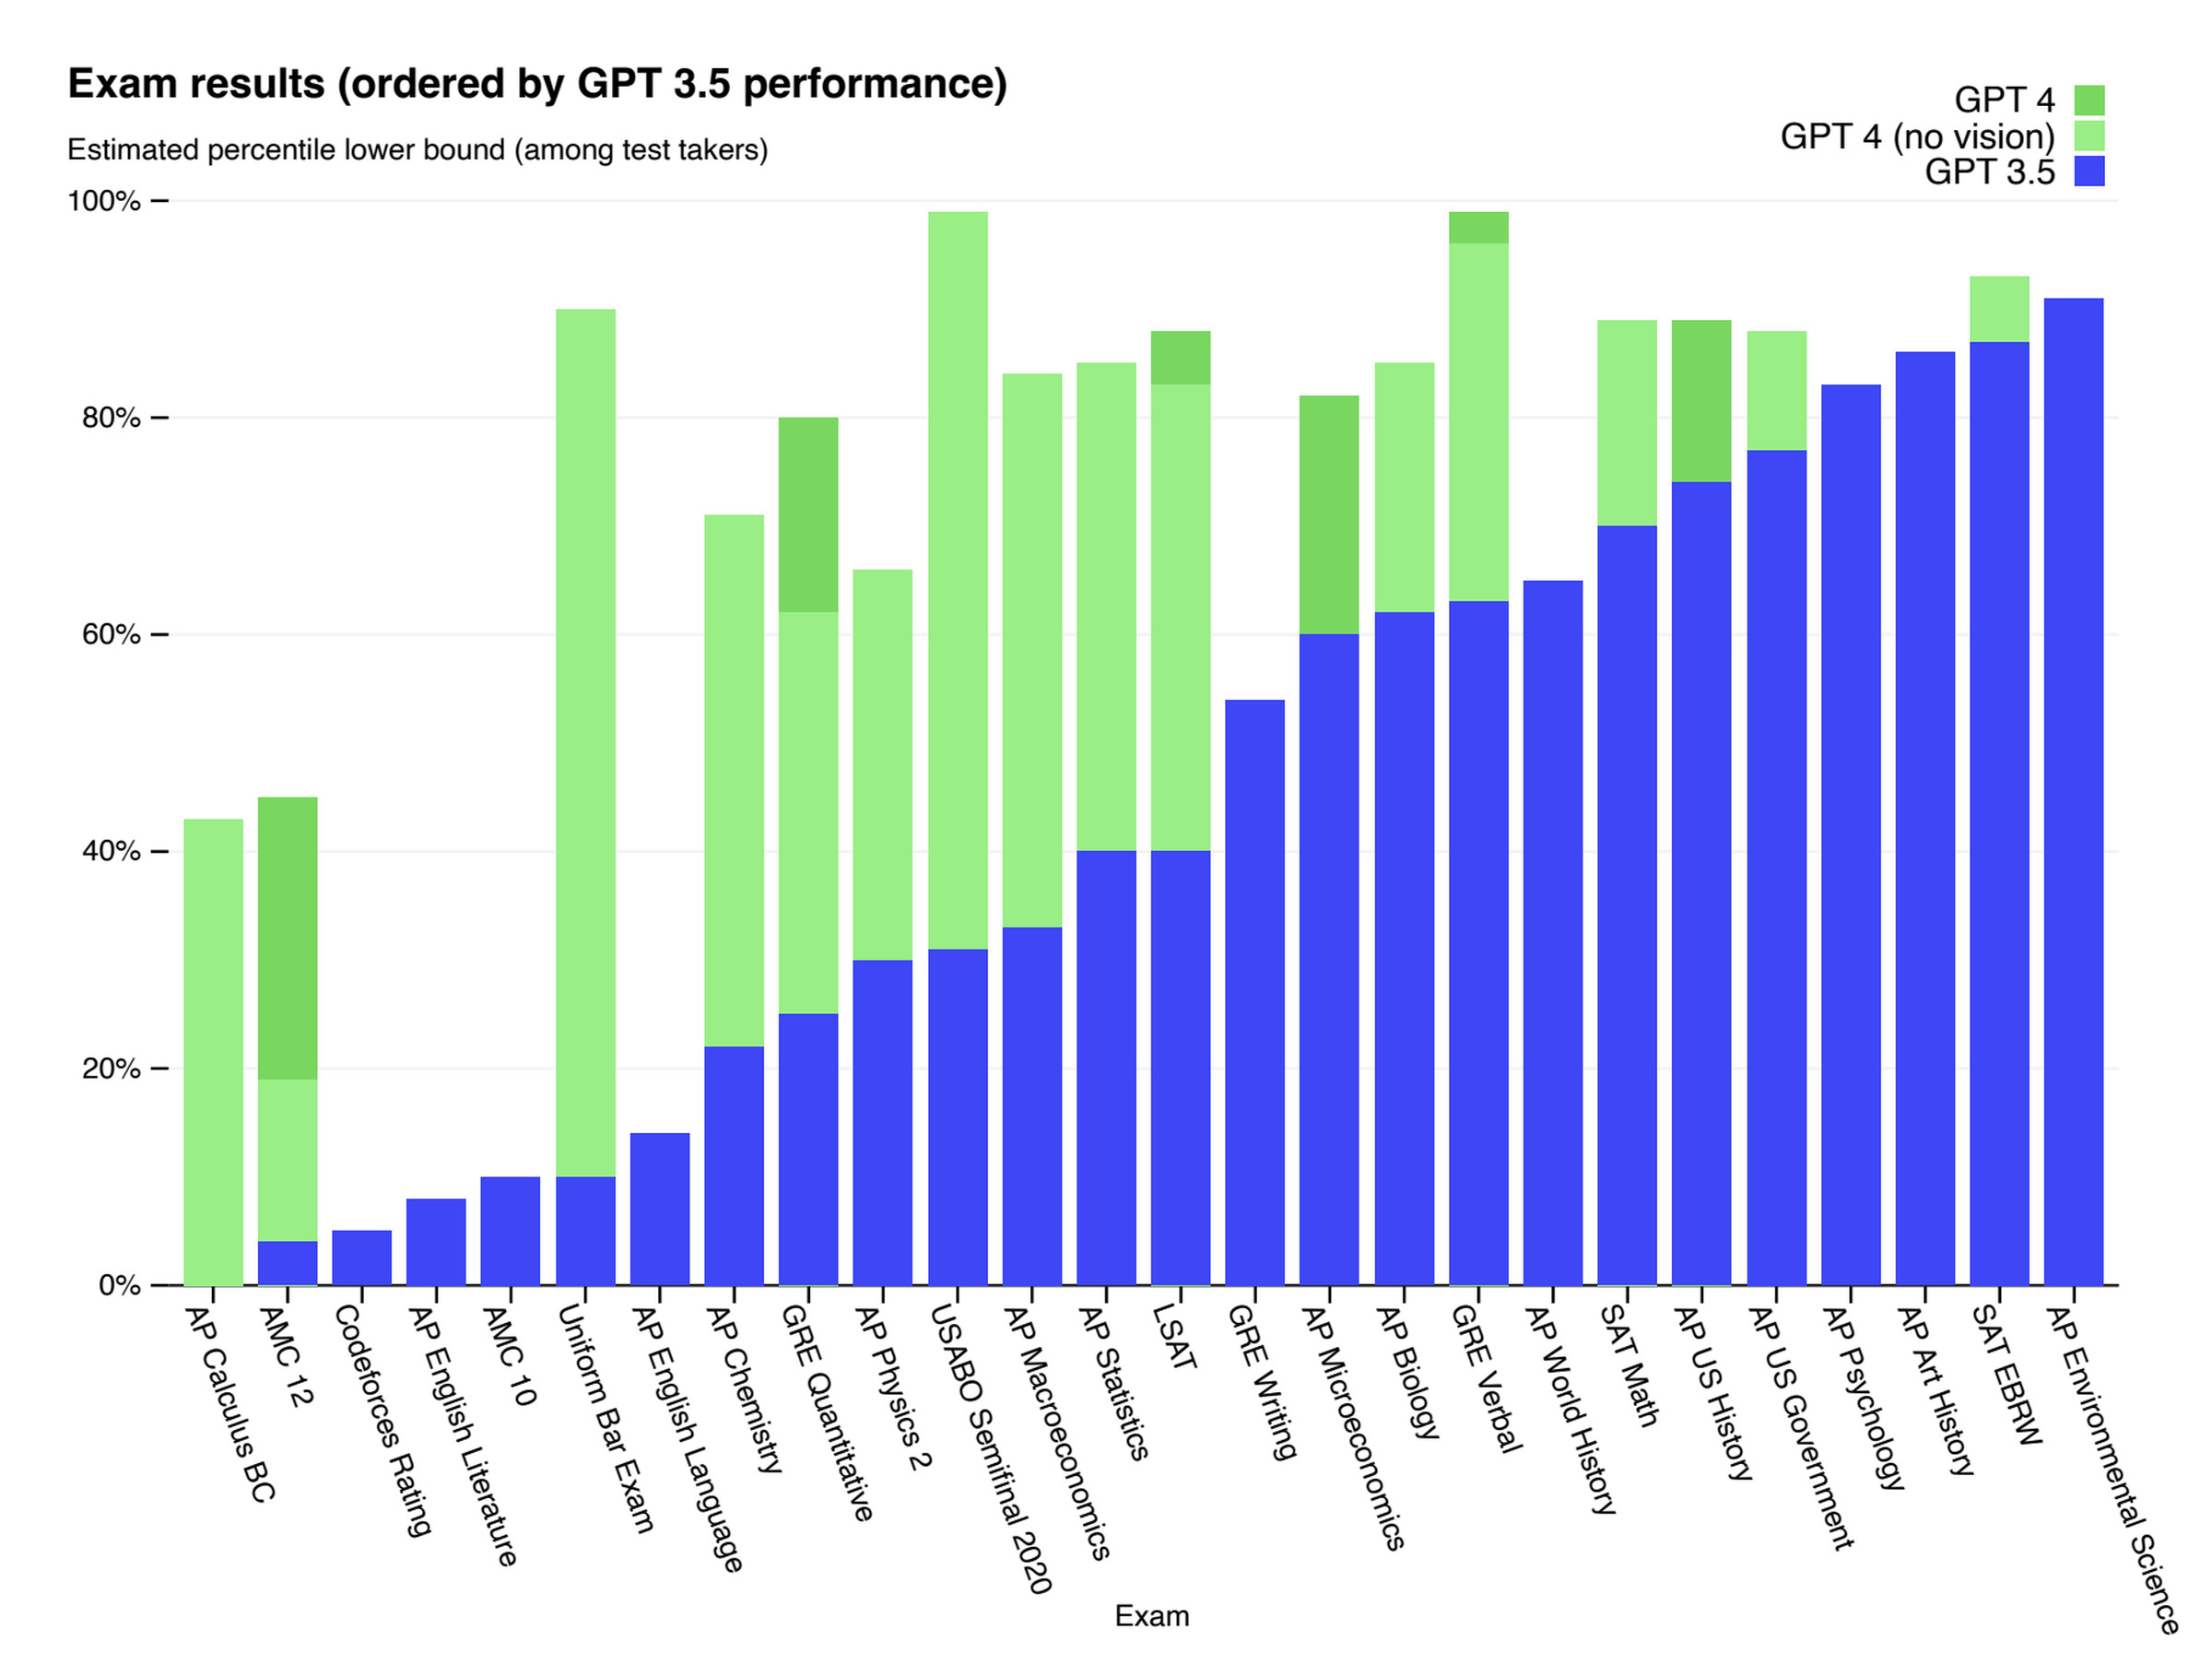 A comparison of GPT-4’s performance on various standardized tests with GPT-3.5.